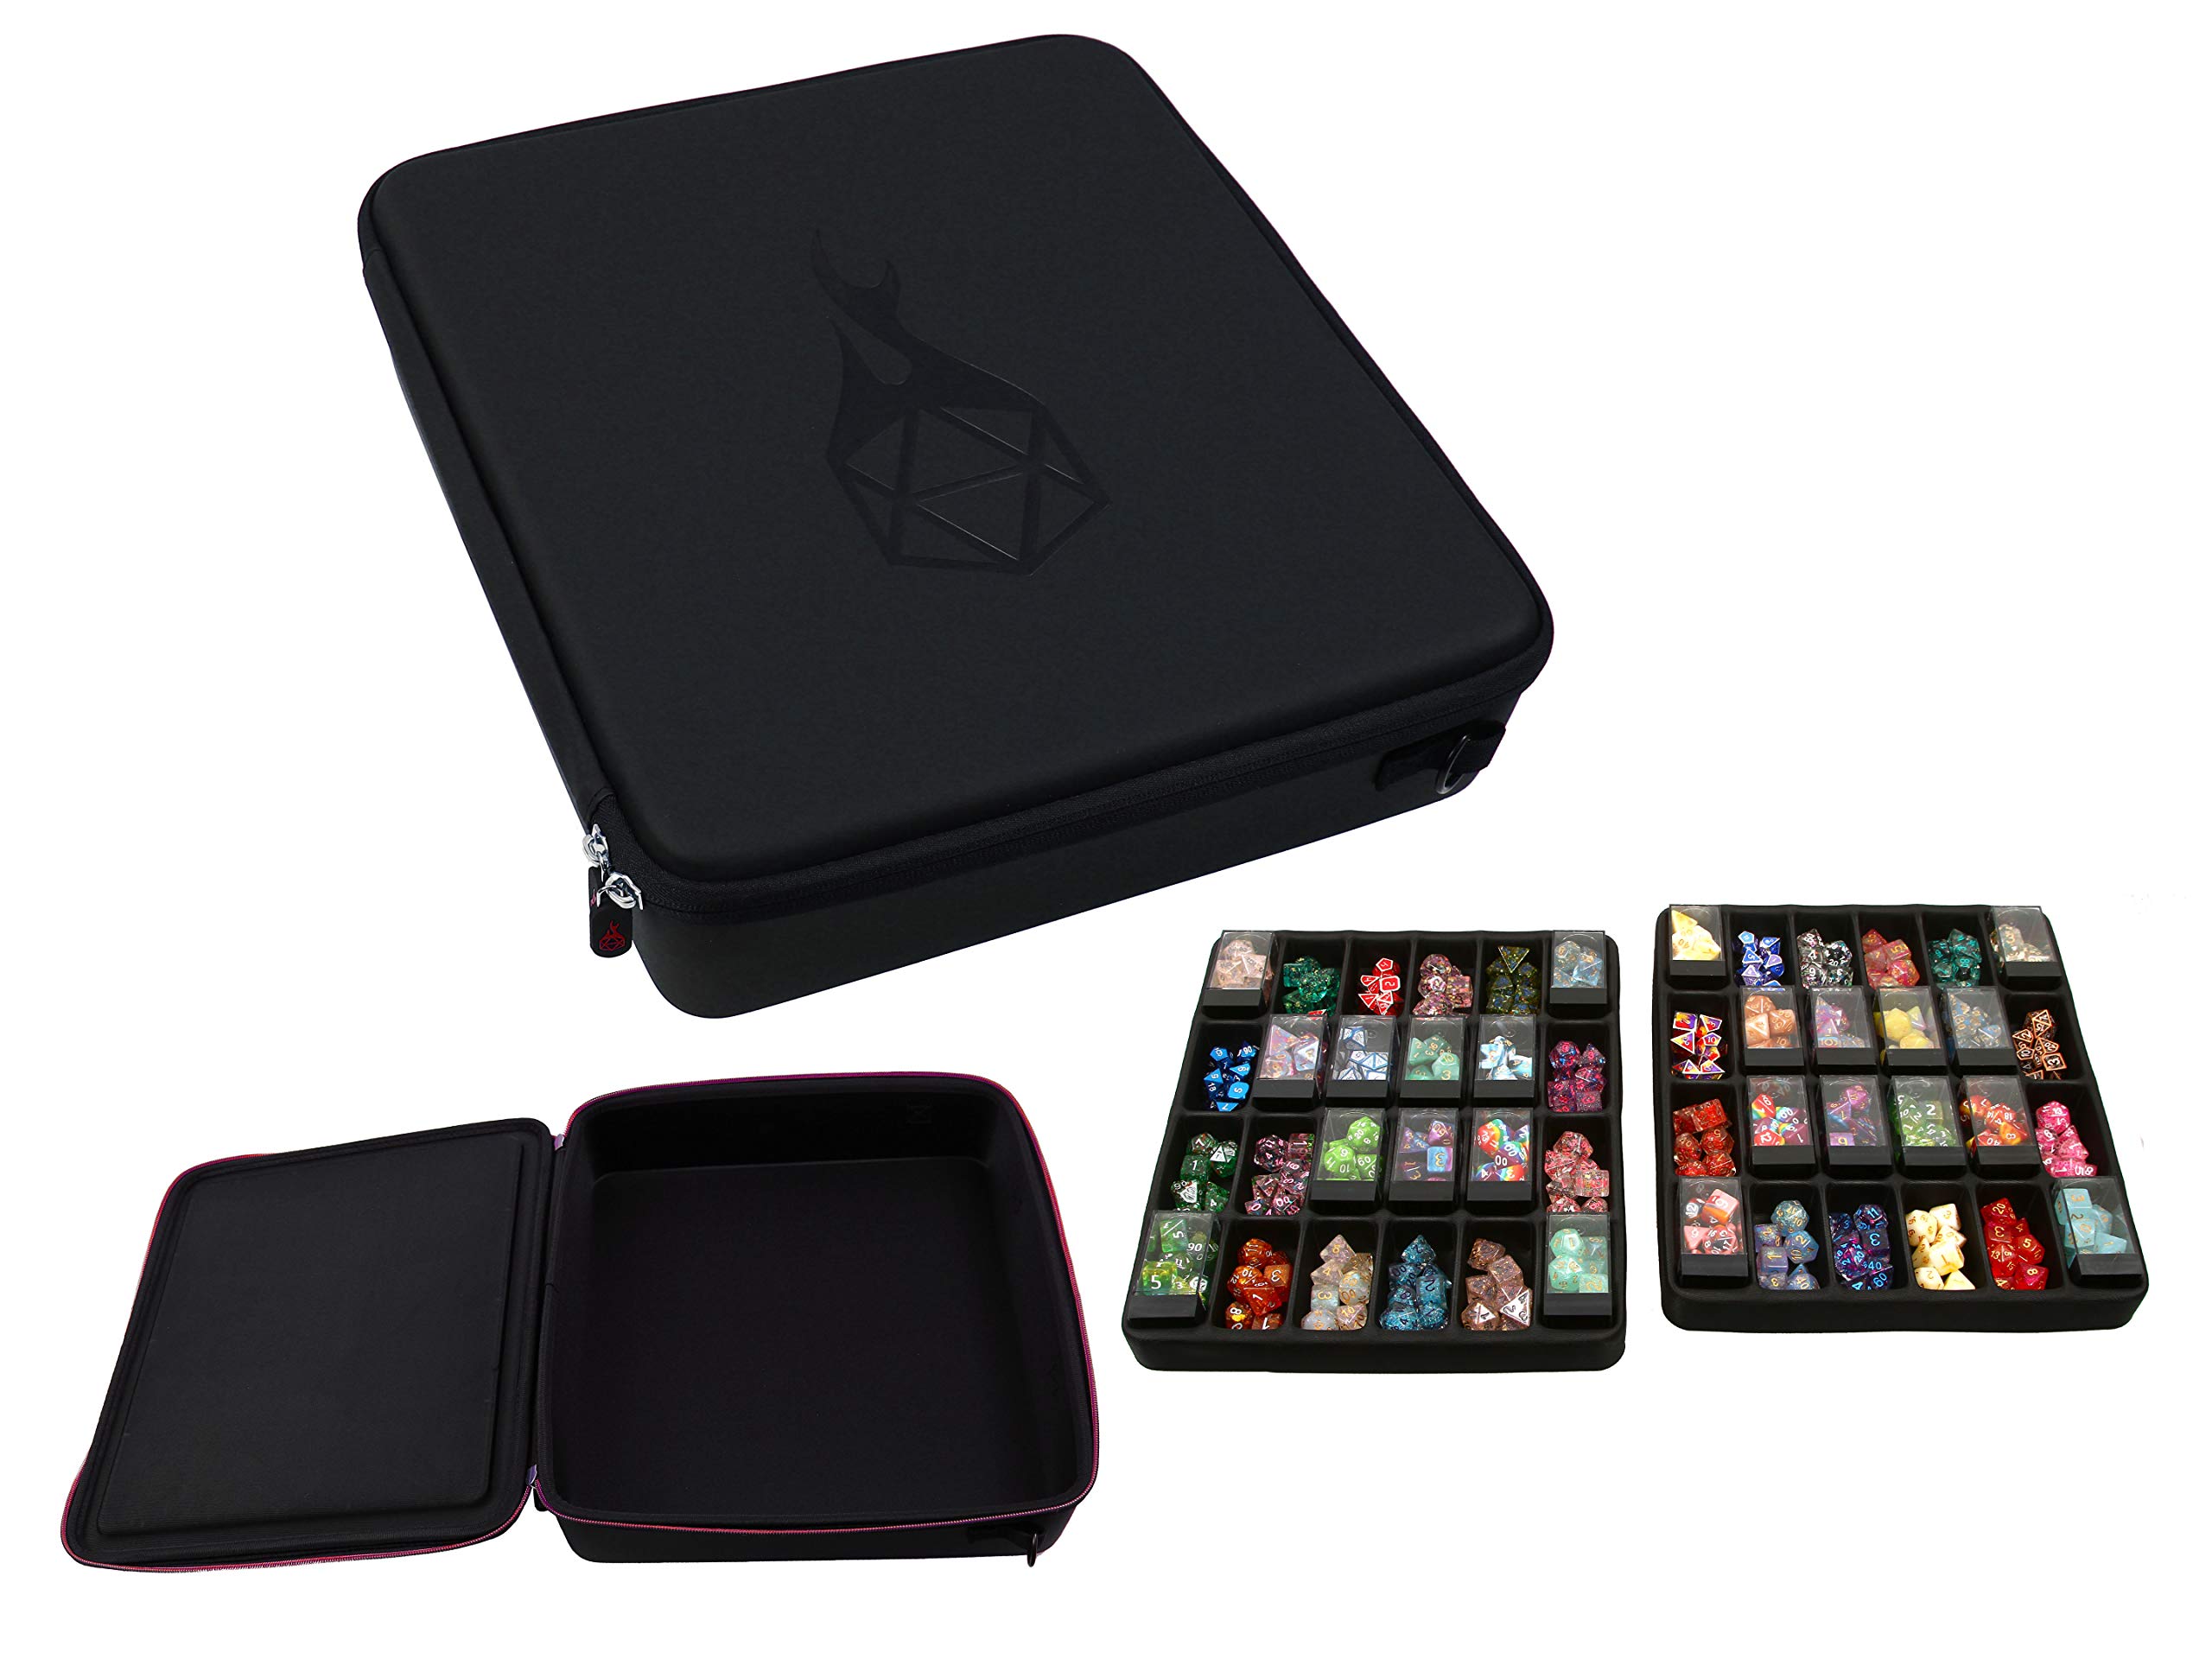 Forged Dice Co. Double Dice Tray Dice Case - Holds 40 Plastic Dice Storage Cubes or 14 Dice Per Section up to 560 Total Dice - Dice Tray and Display Case Compatible with Chessex Cubes and DnD Dice